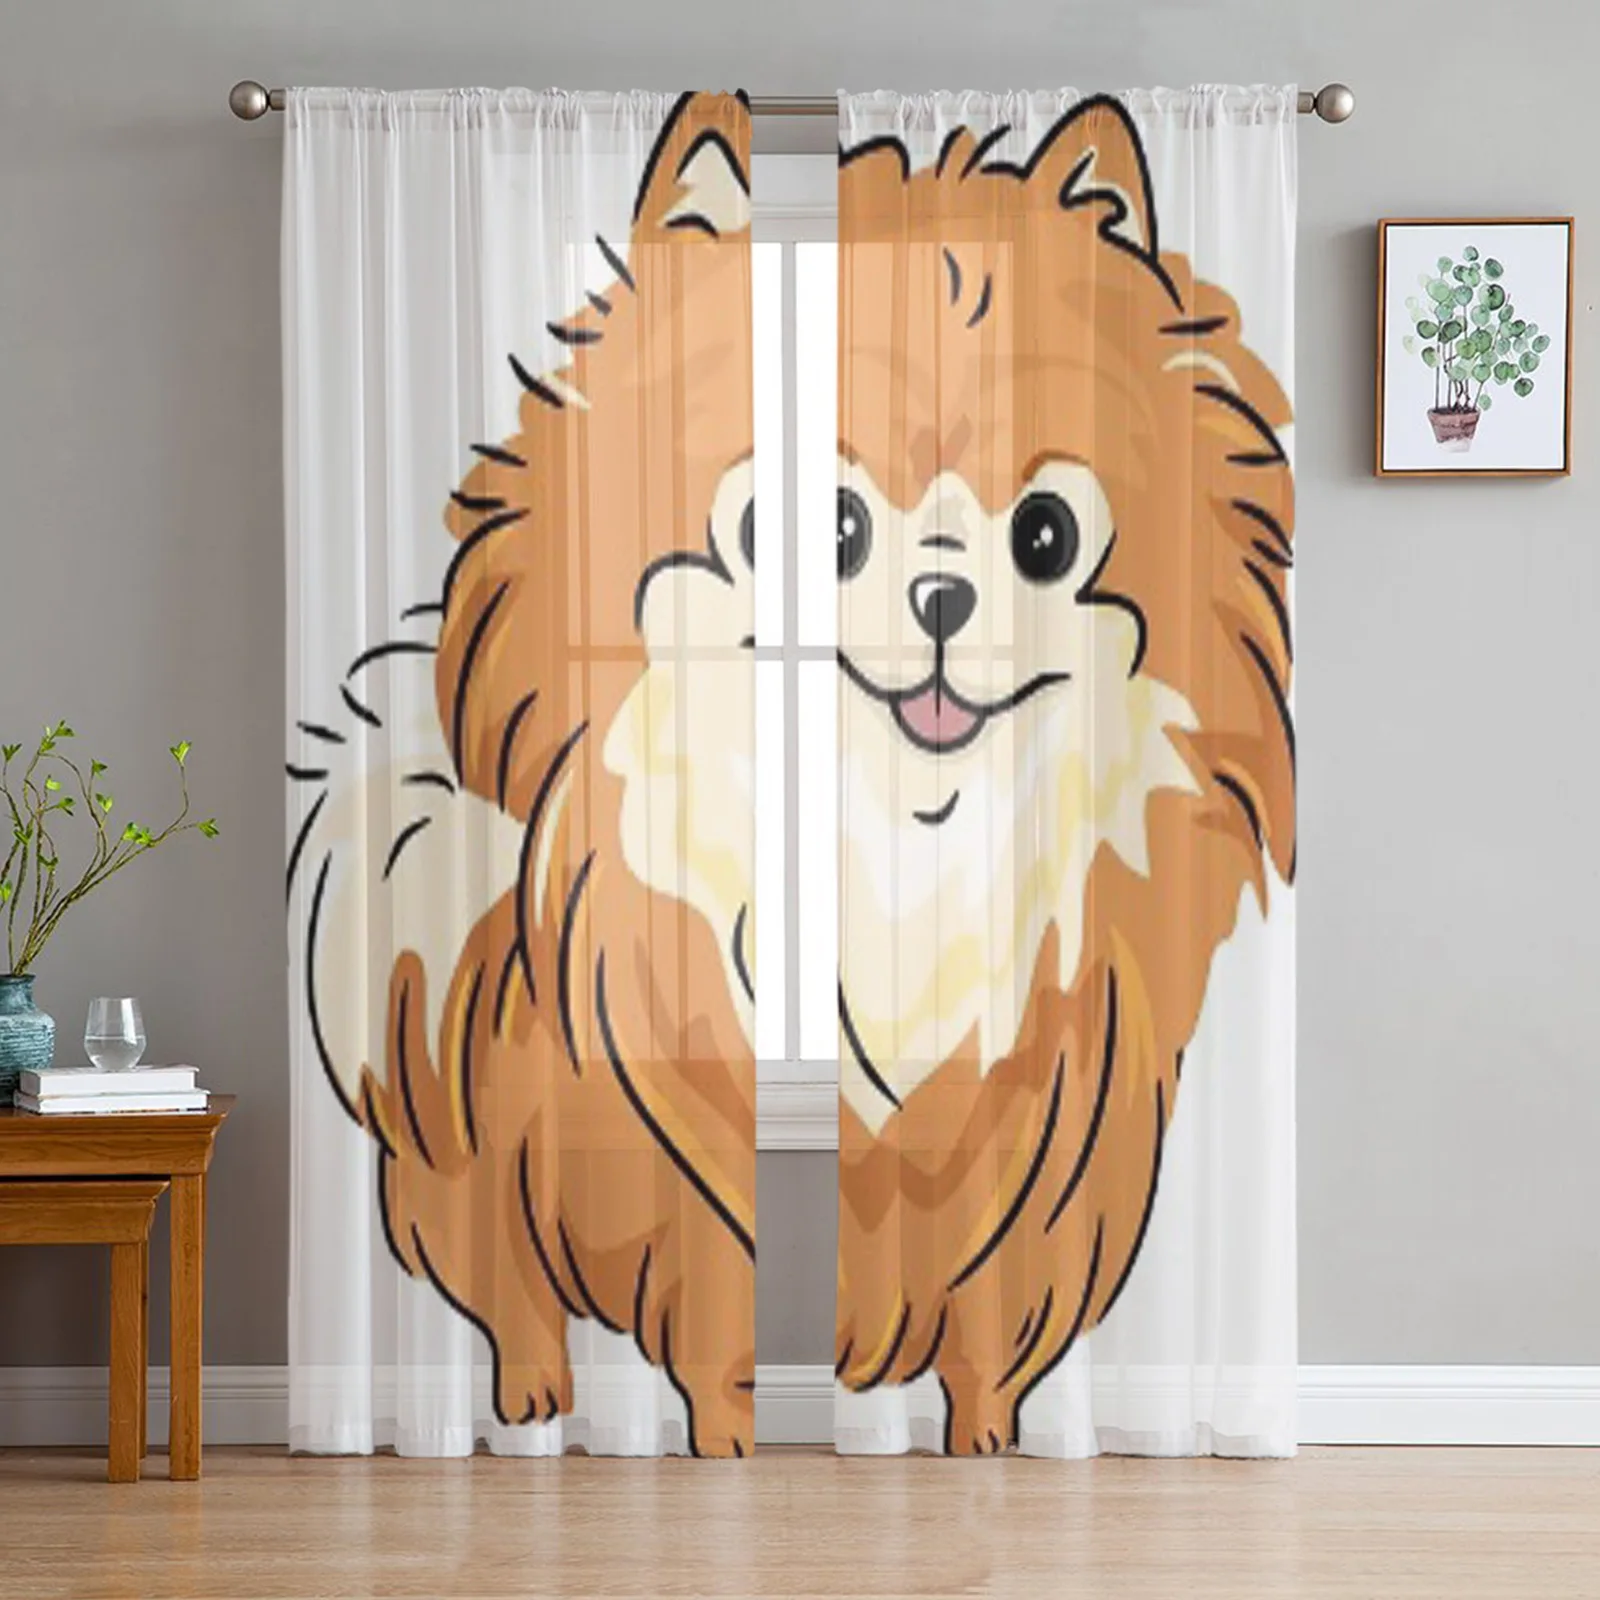 

Featuring A Pomeranian Pet Dog Bay Window Screening Curtains Drape Sheer Tulle For Living Room Bedroom Voile Organza Curtains